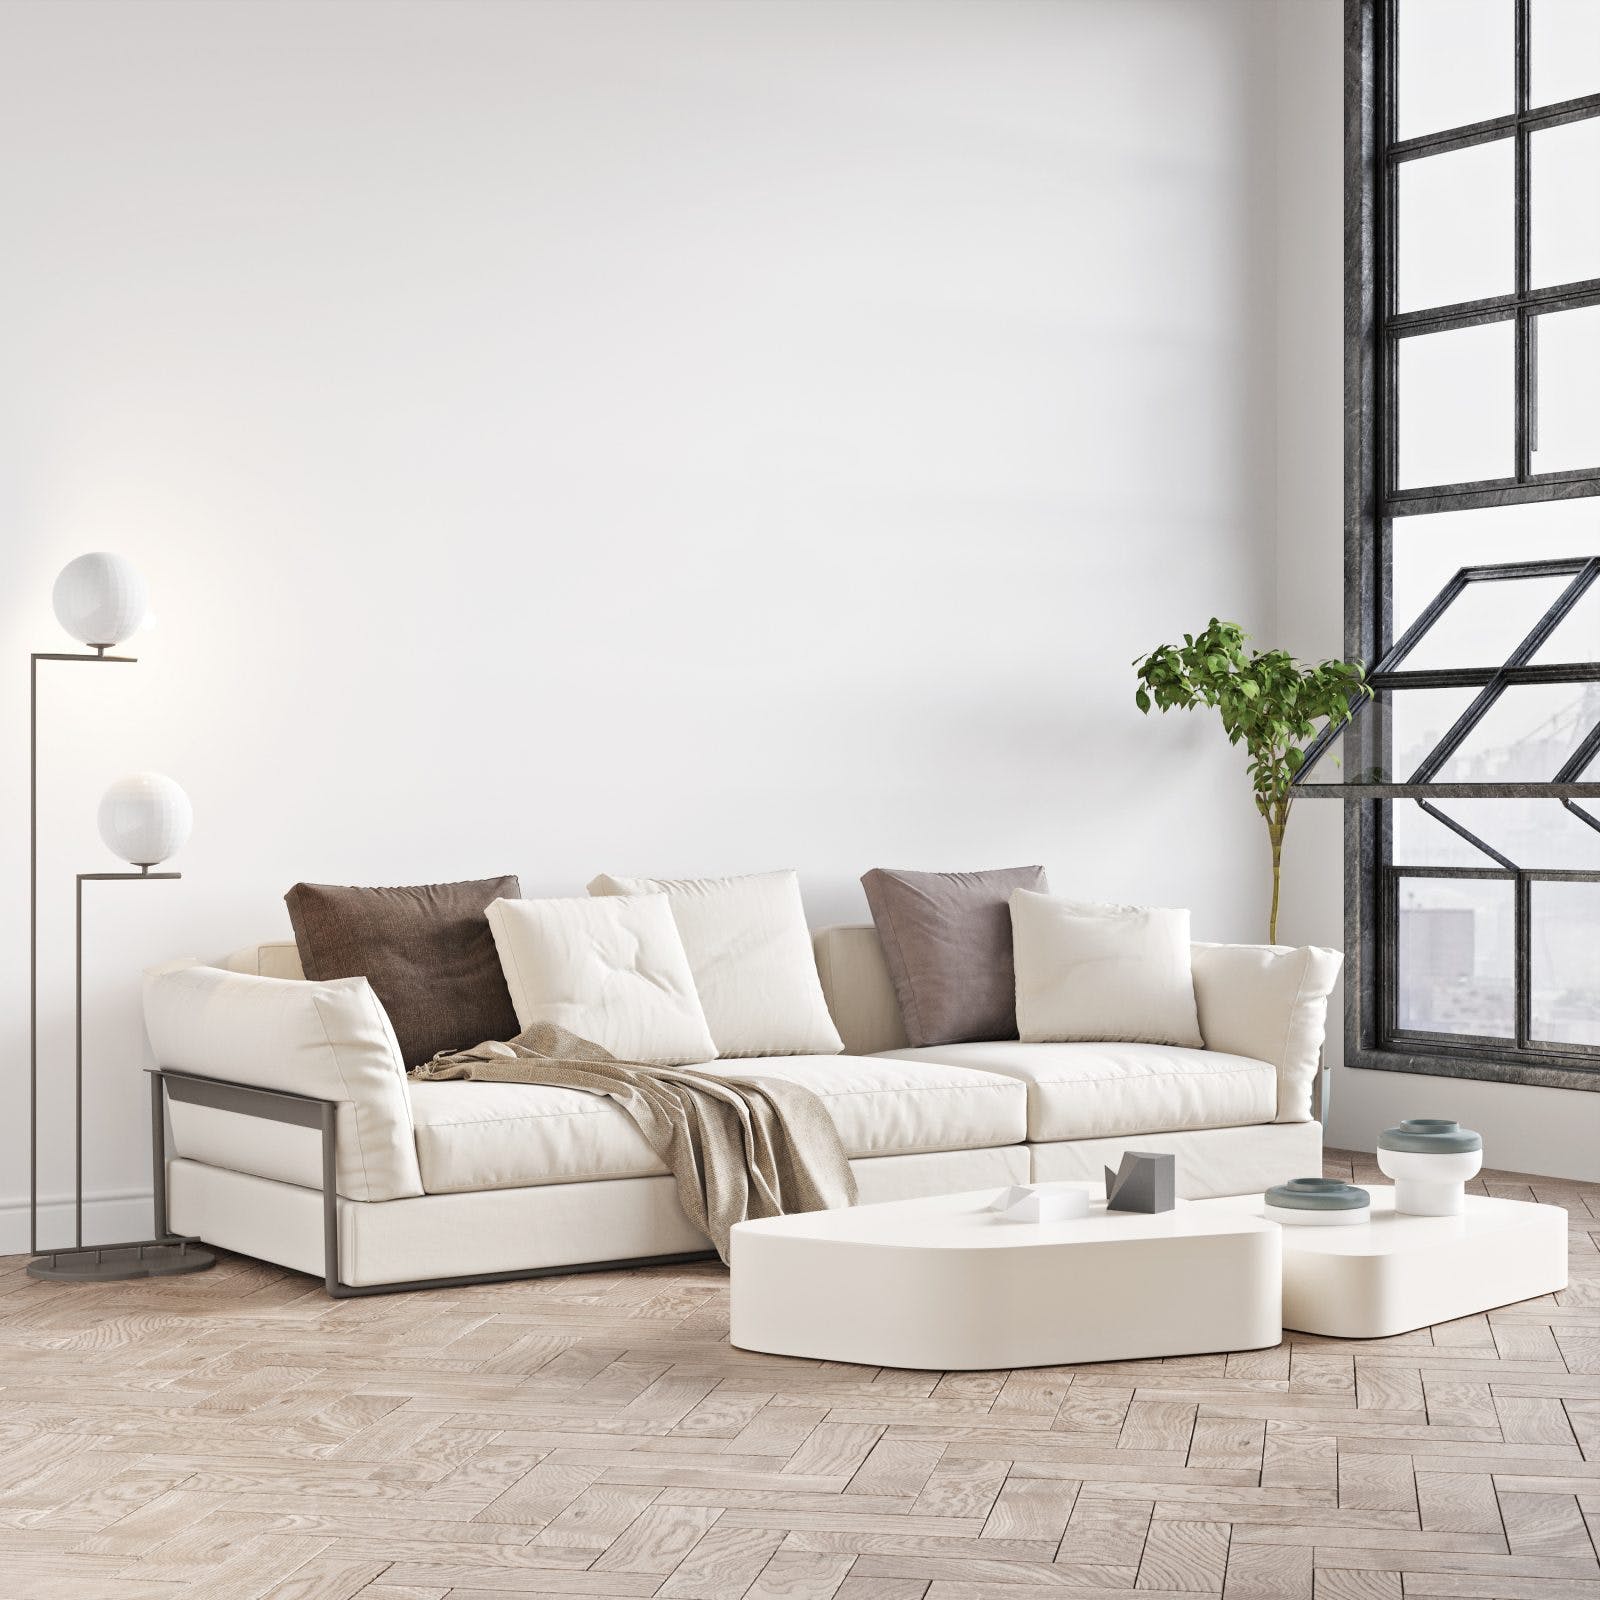 Beautiful interior of a modern room. Bright and clean design. A sofa standing by a large window against a wall background.